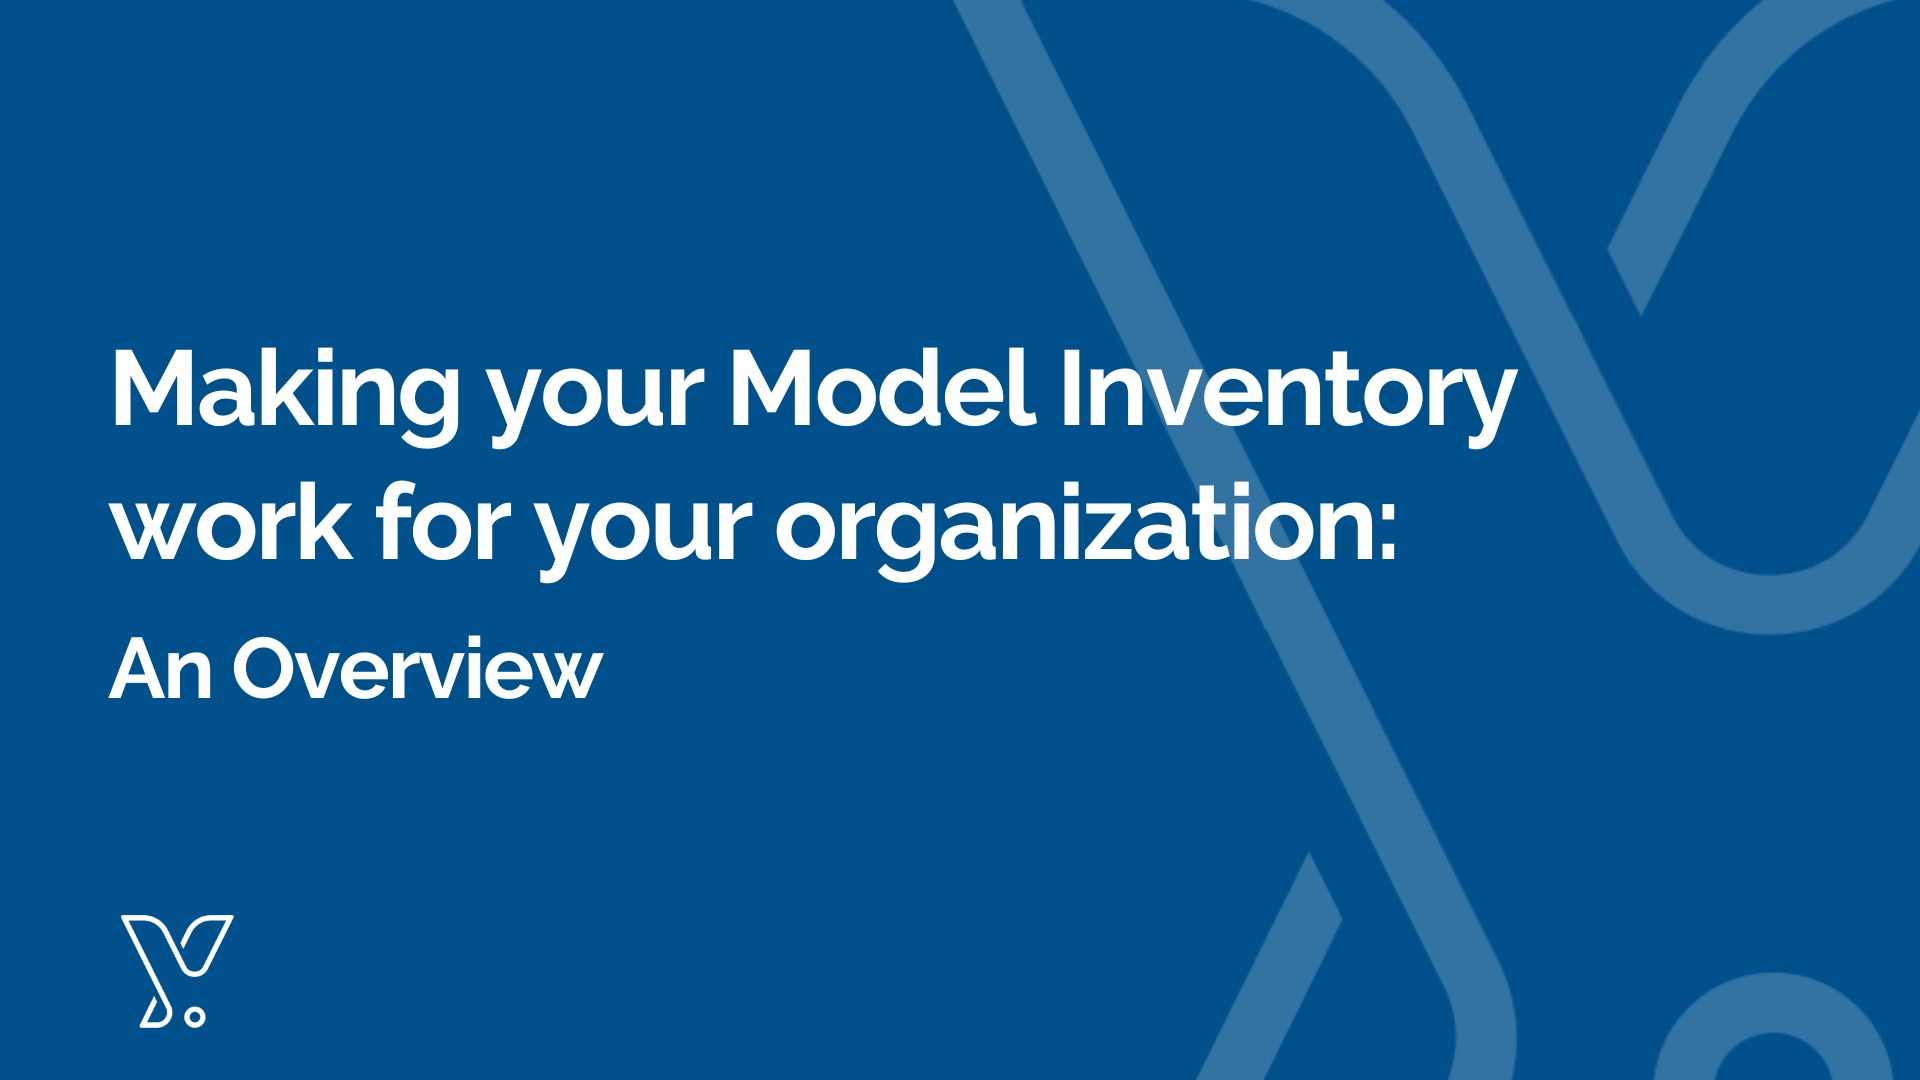 Making your Model Inventory work for your organization: An Overview